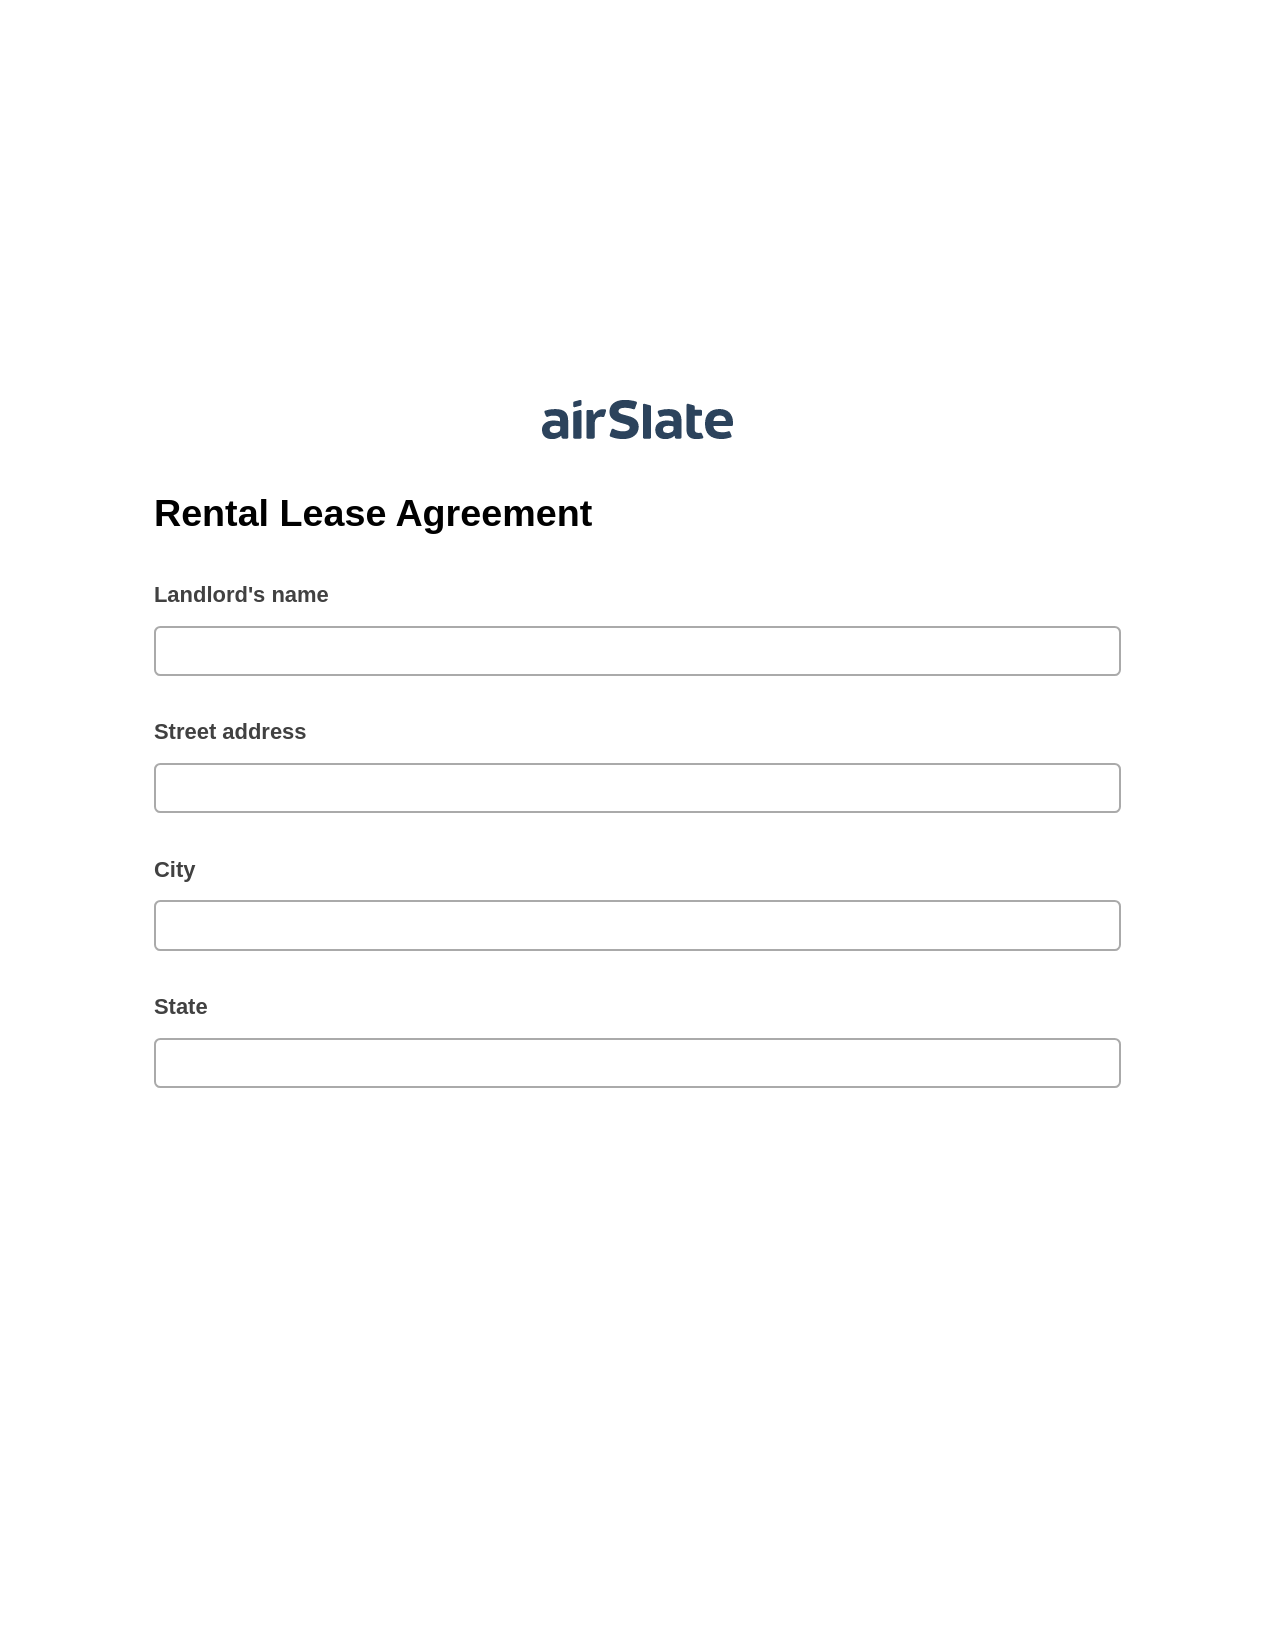 Rental Lease Agreement Pre-fill from CSV File Dropdown Options Bot, Create Slate every Google Sheet Update Bot, OneDrive Bot